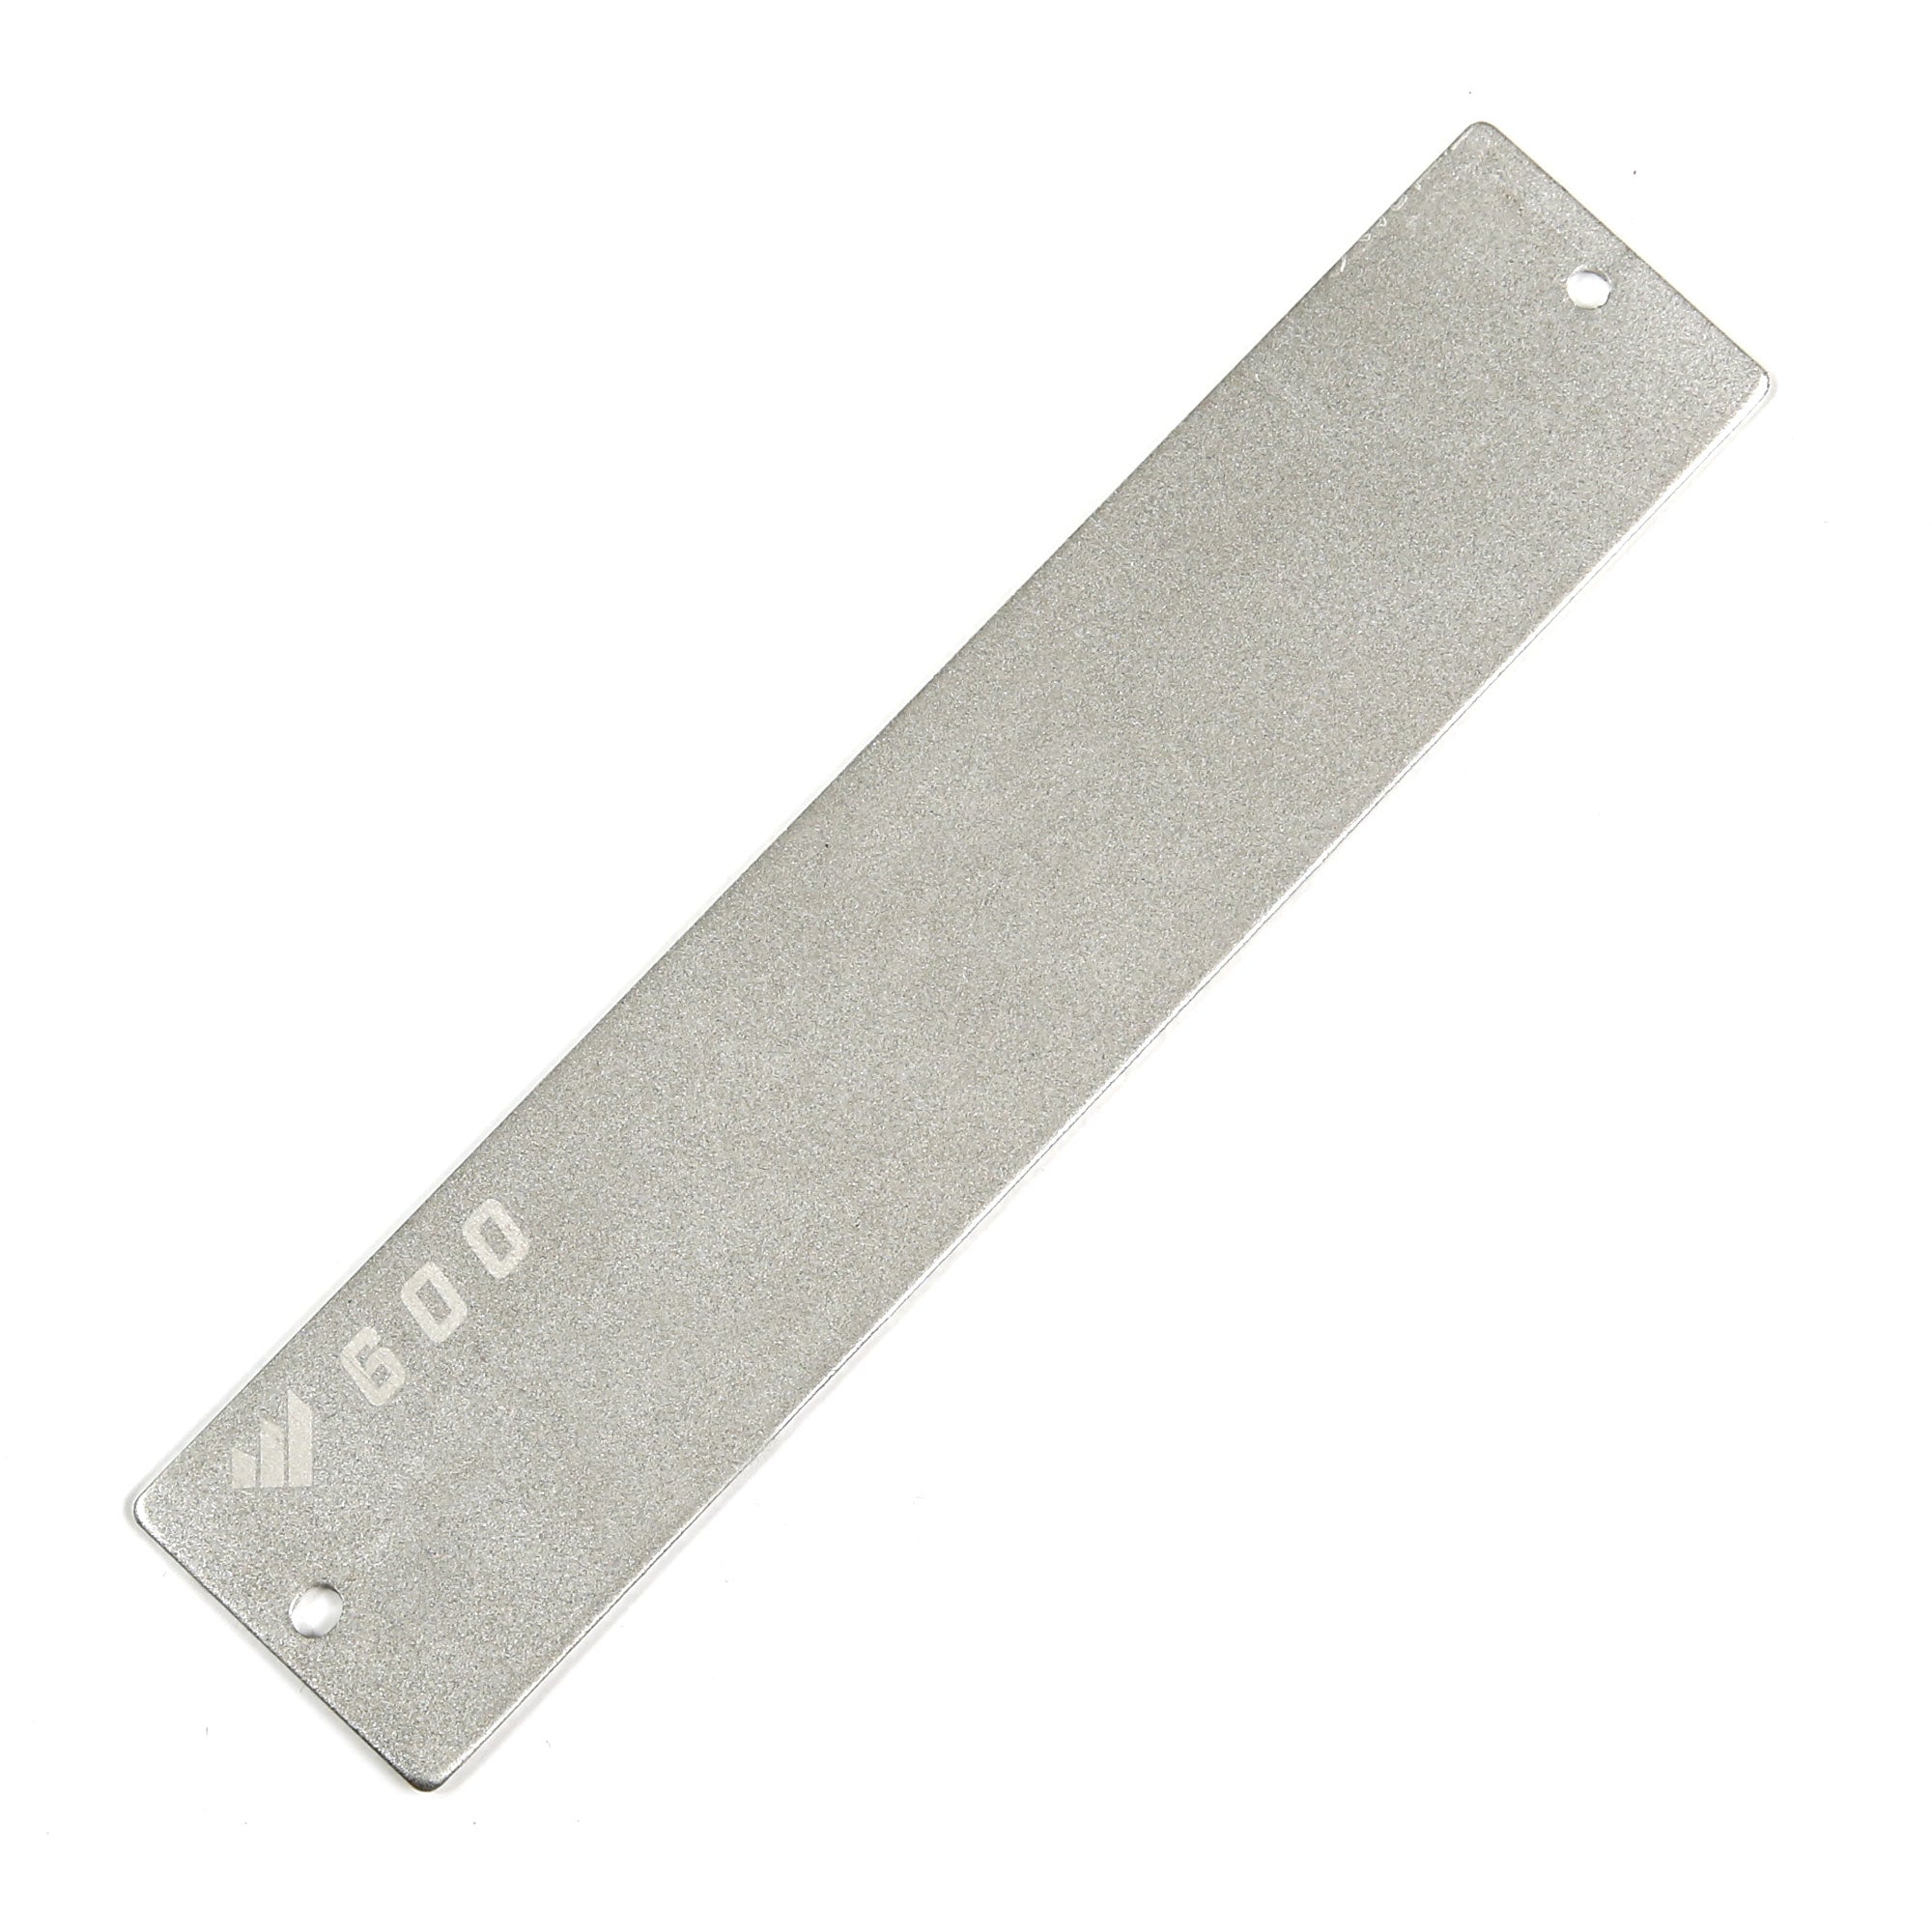 Replacement 600 Grit Plate for the Benchstone Knife Sharpener™ and Guided Sharpening System™